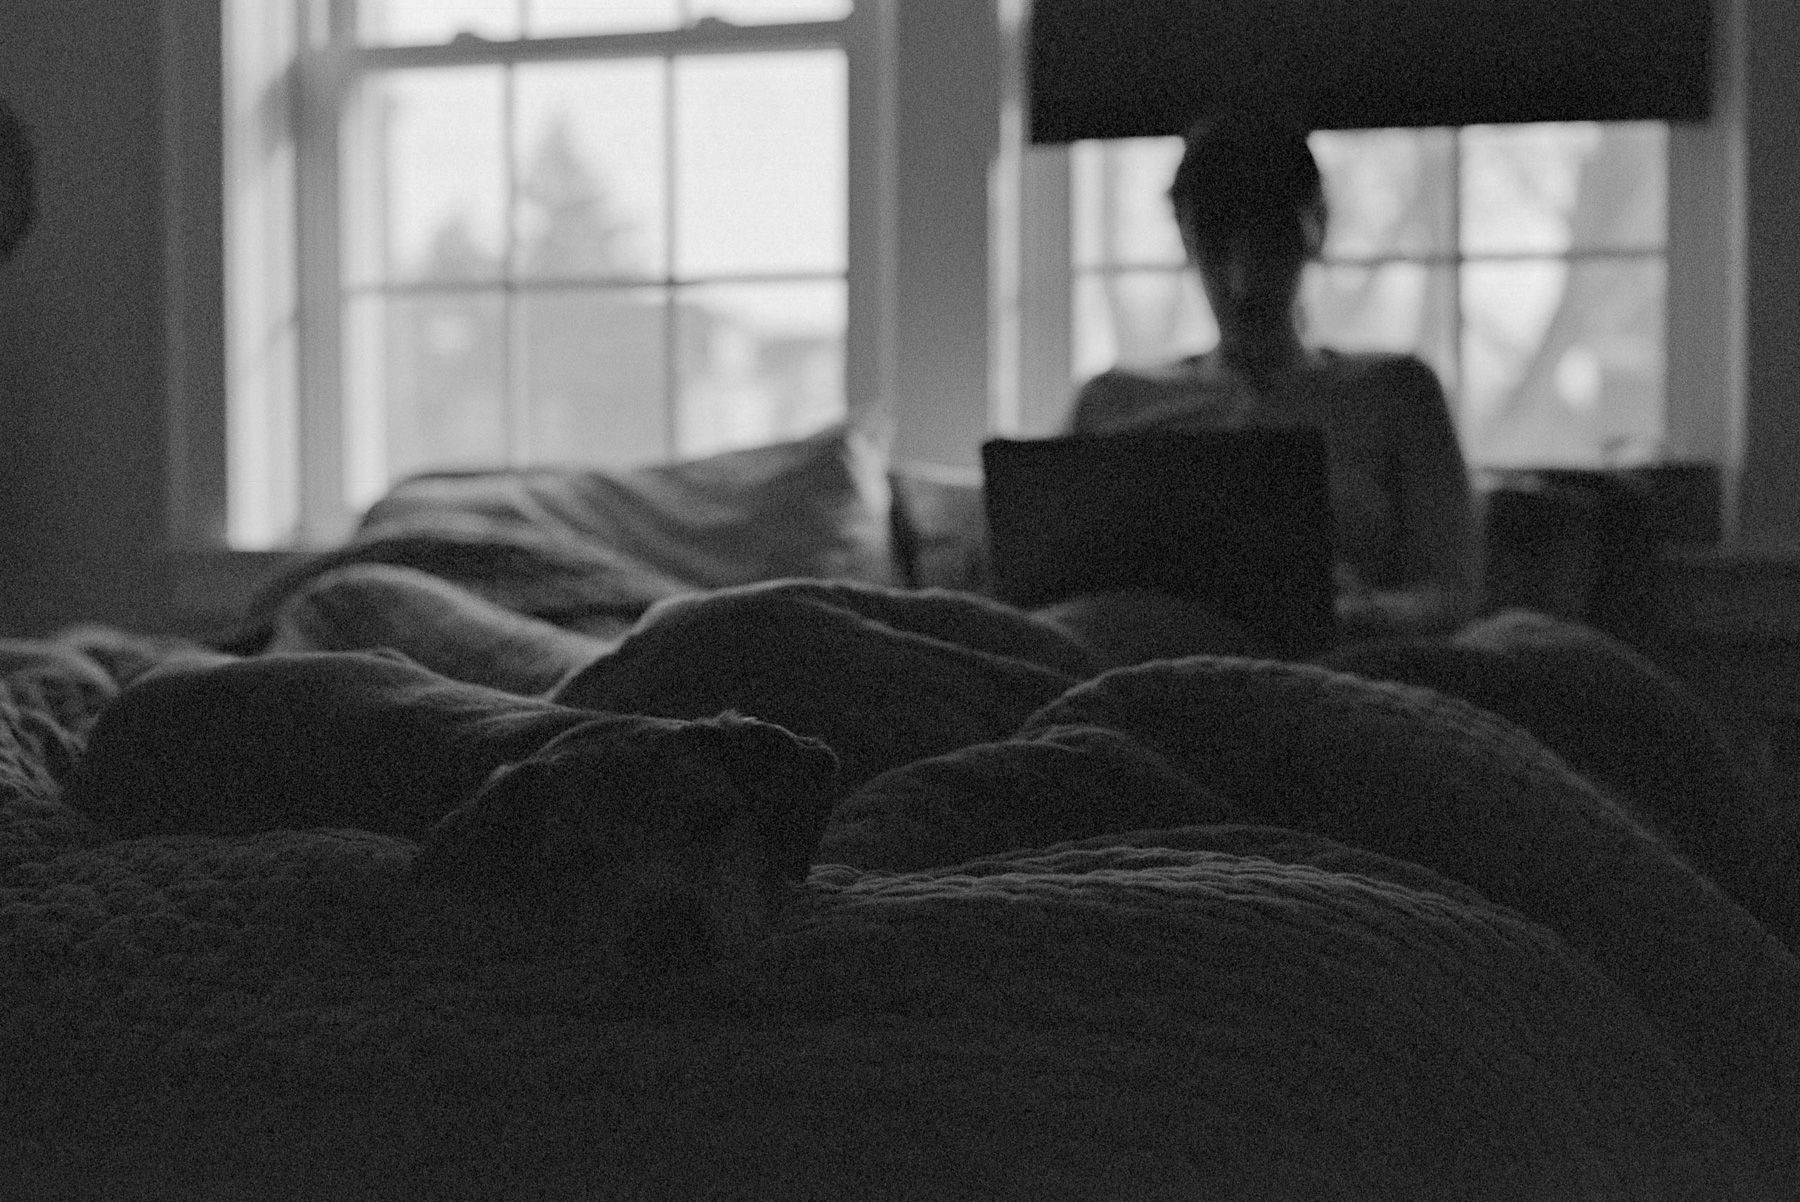 Black and white. Sleeping pup at foot of bed. Julia on laptop, out of focus.